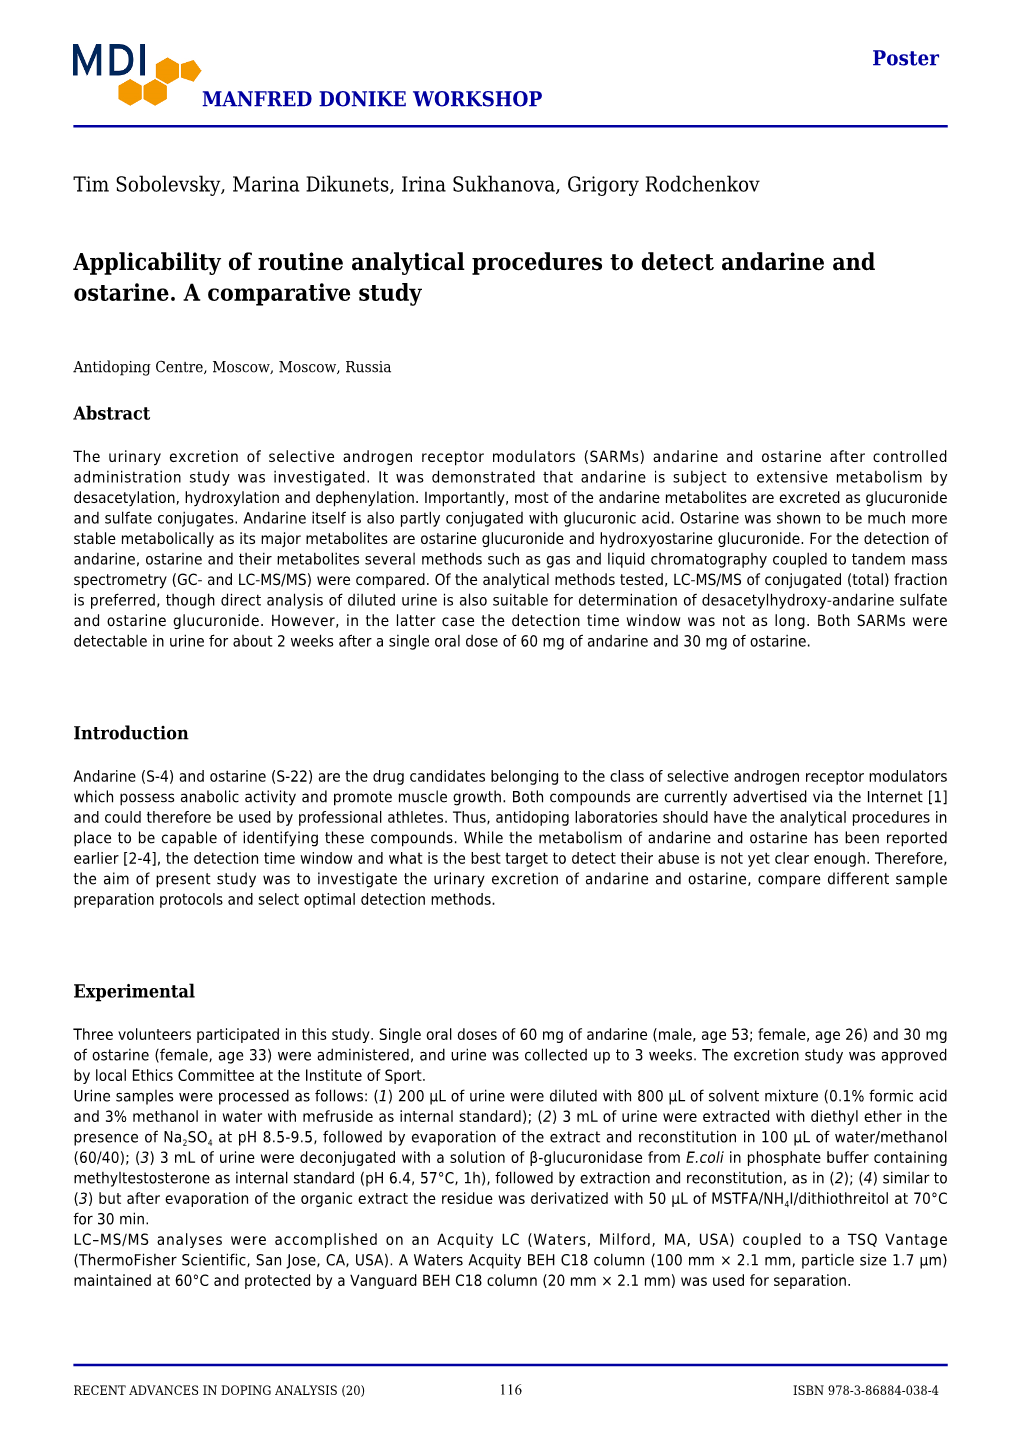 Applicability of Routine Analytical Procedures to Detect Andarine and Ostarine